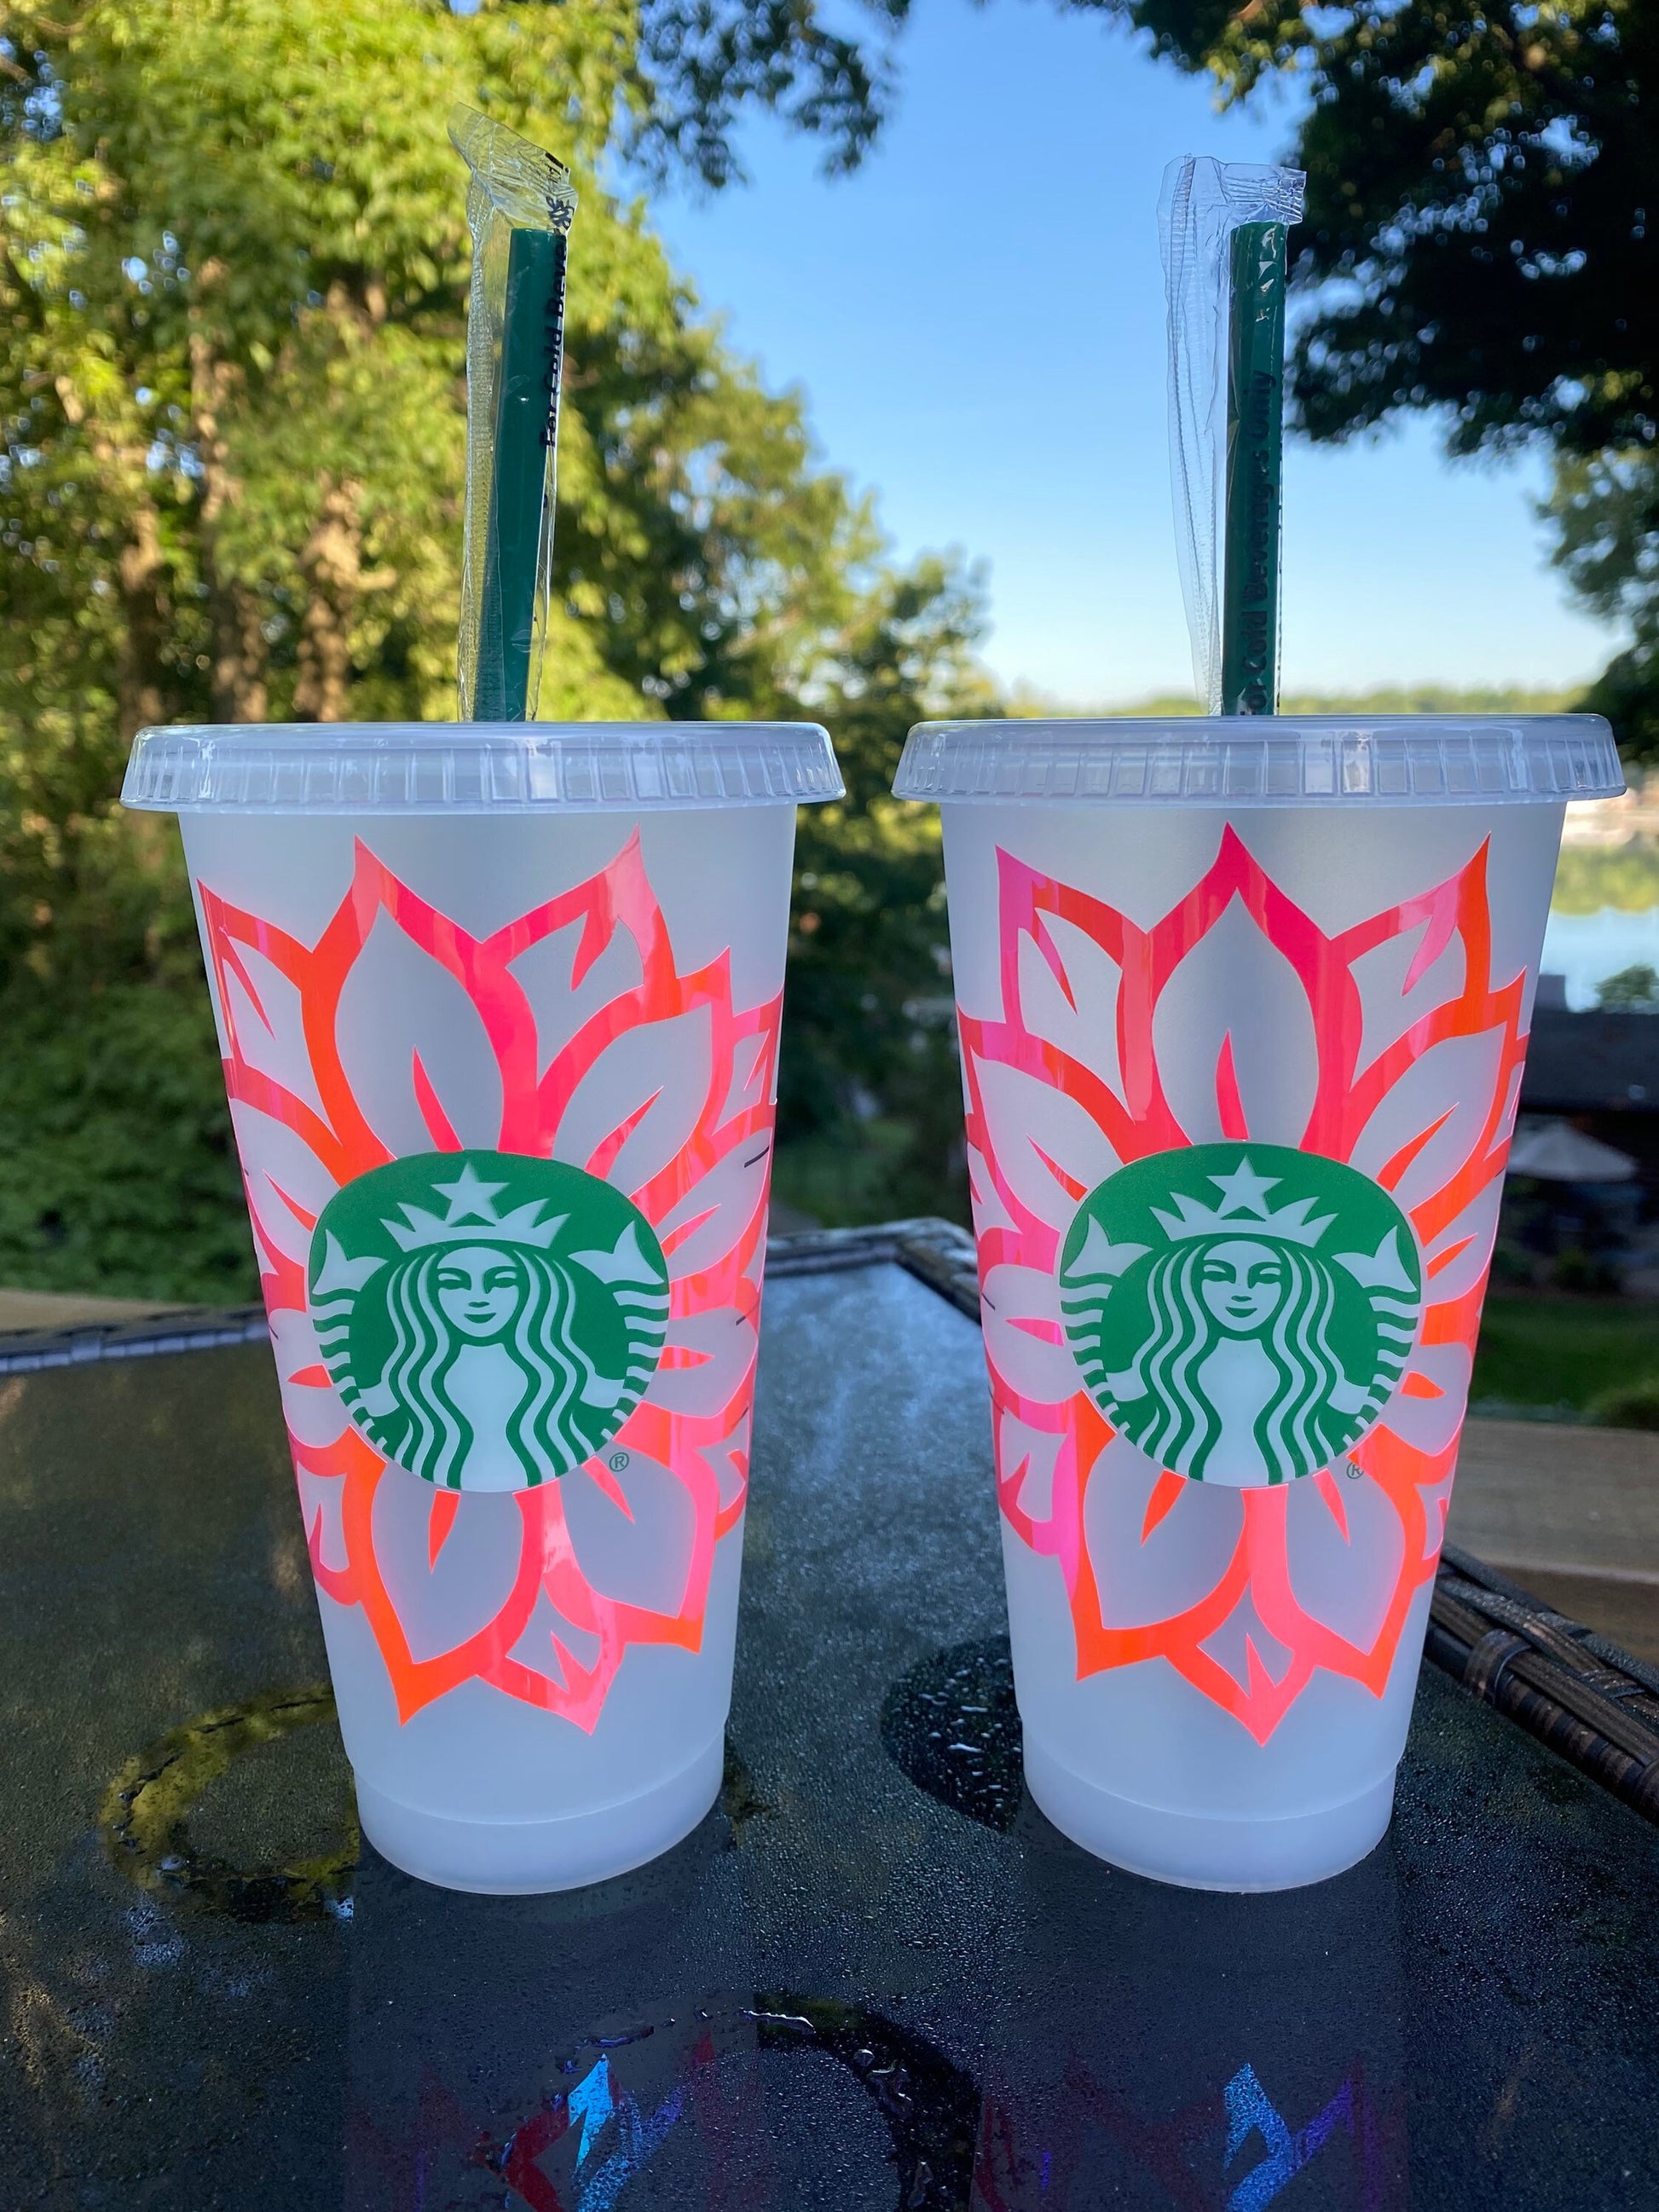 Sunflower Personalized Starbucks Cup / Coffee Cup / Gift Ideas 